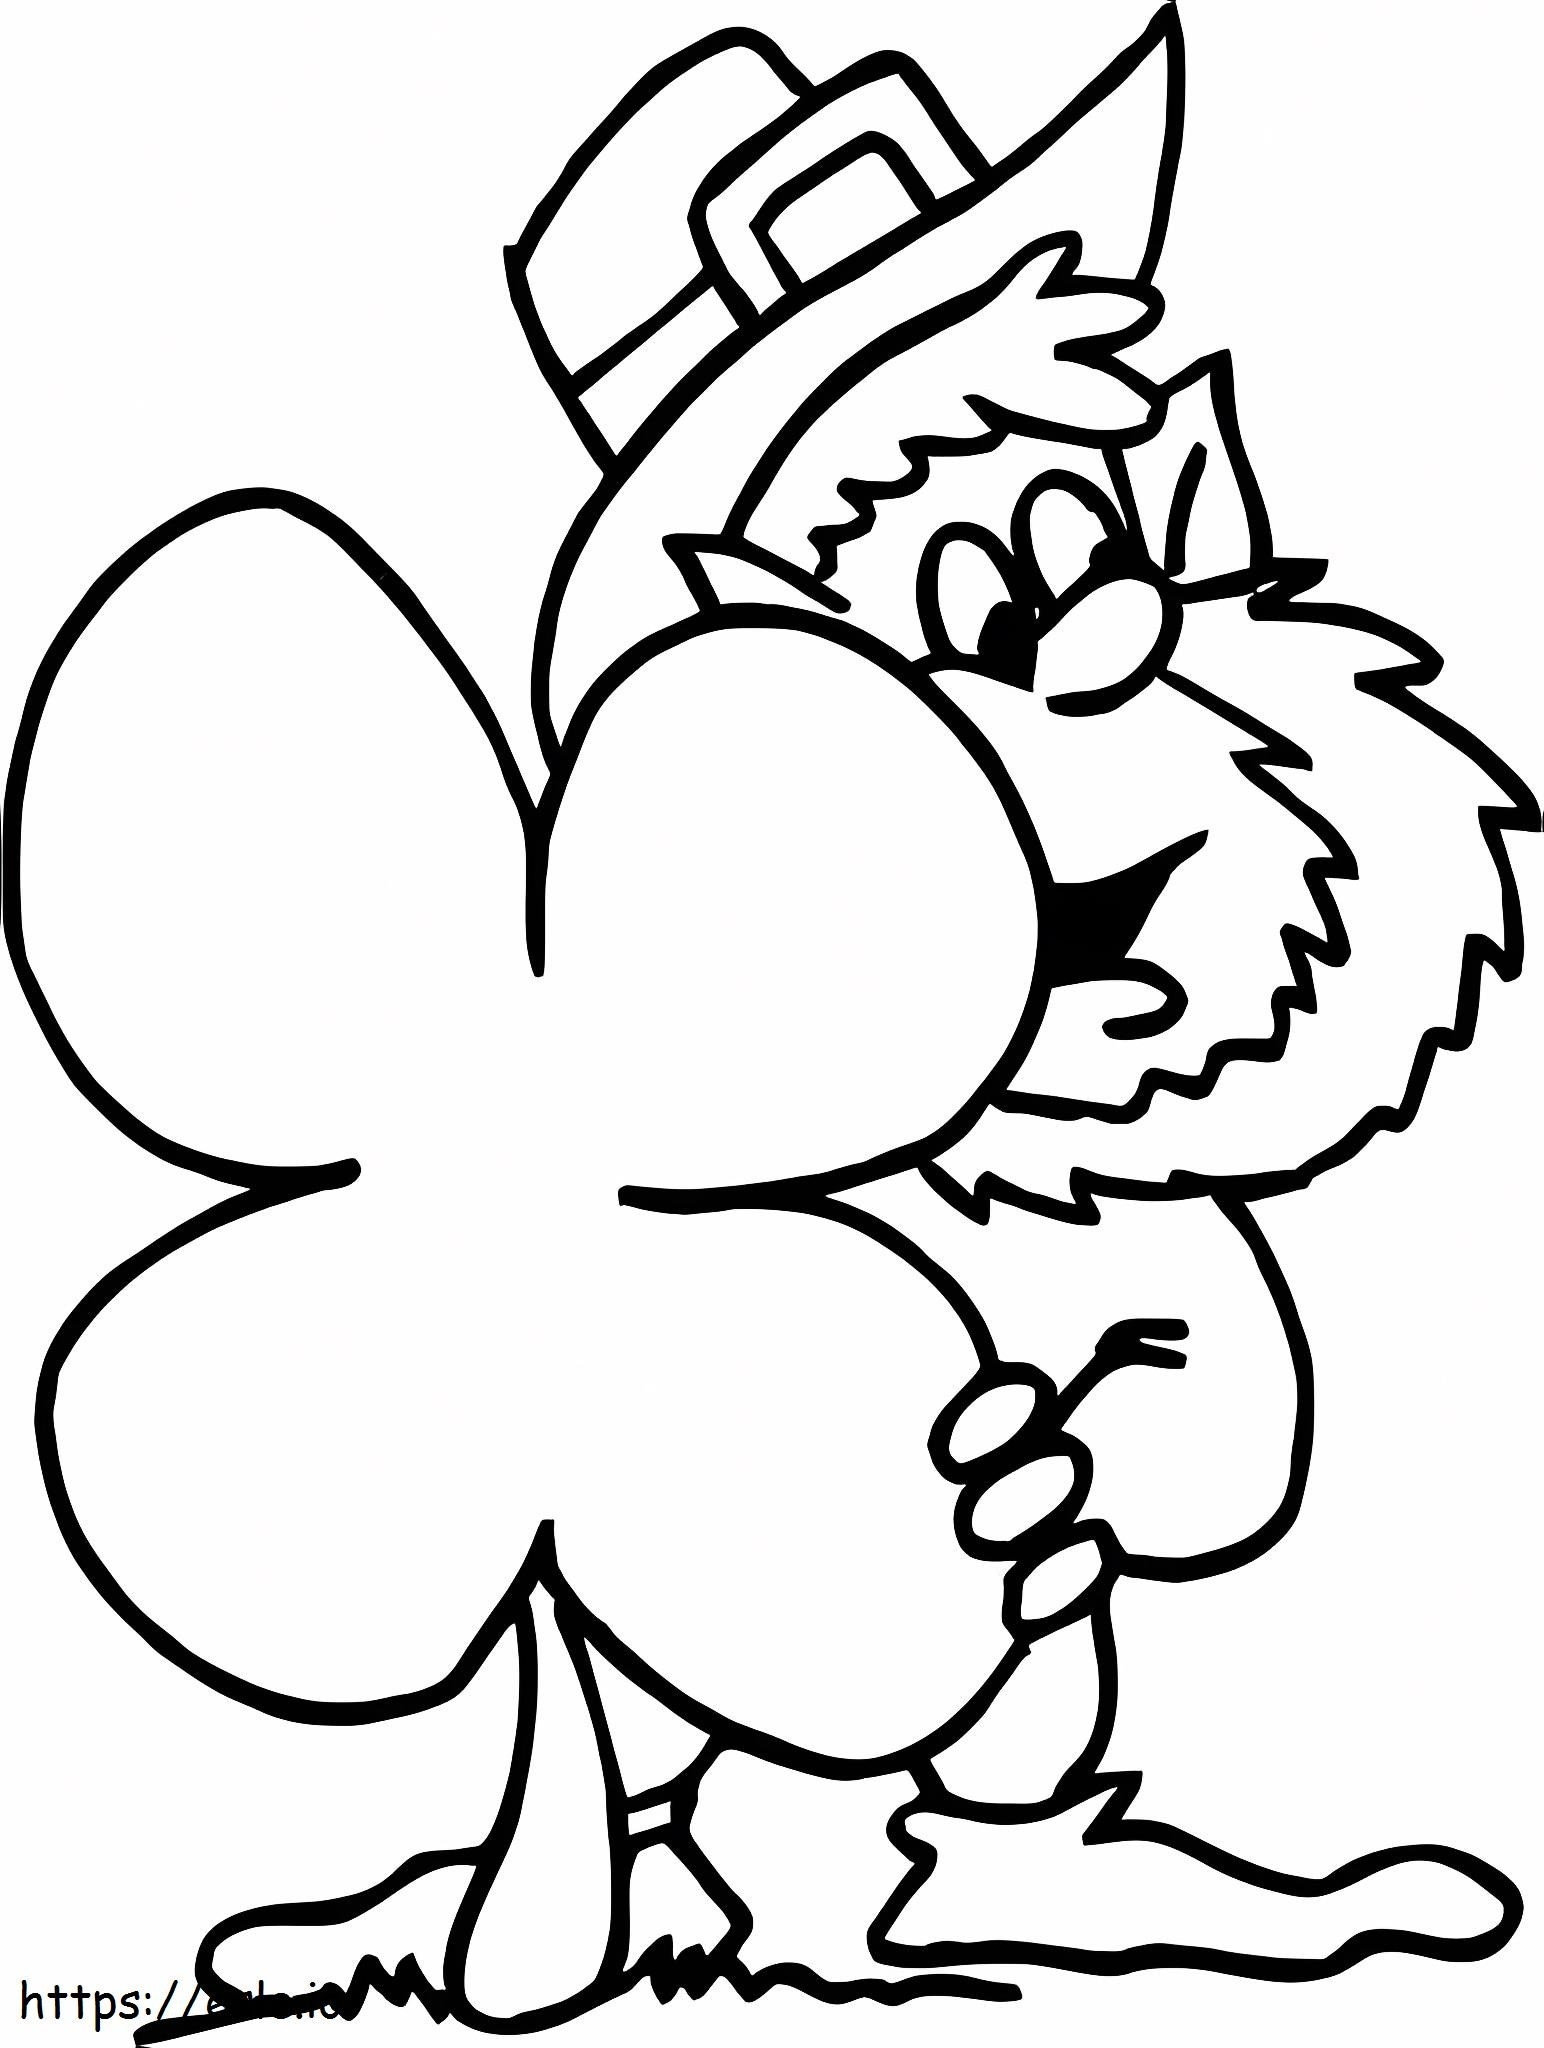 Man Holding Clover coloring page